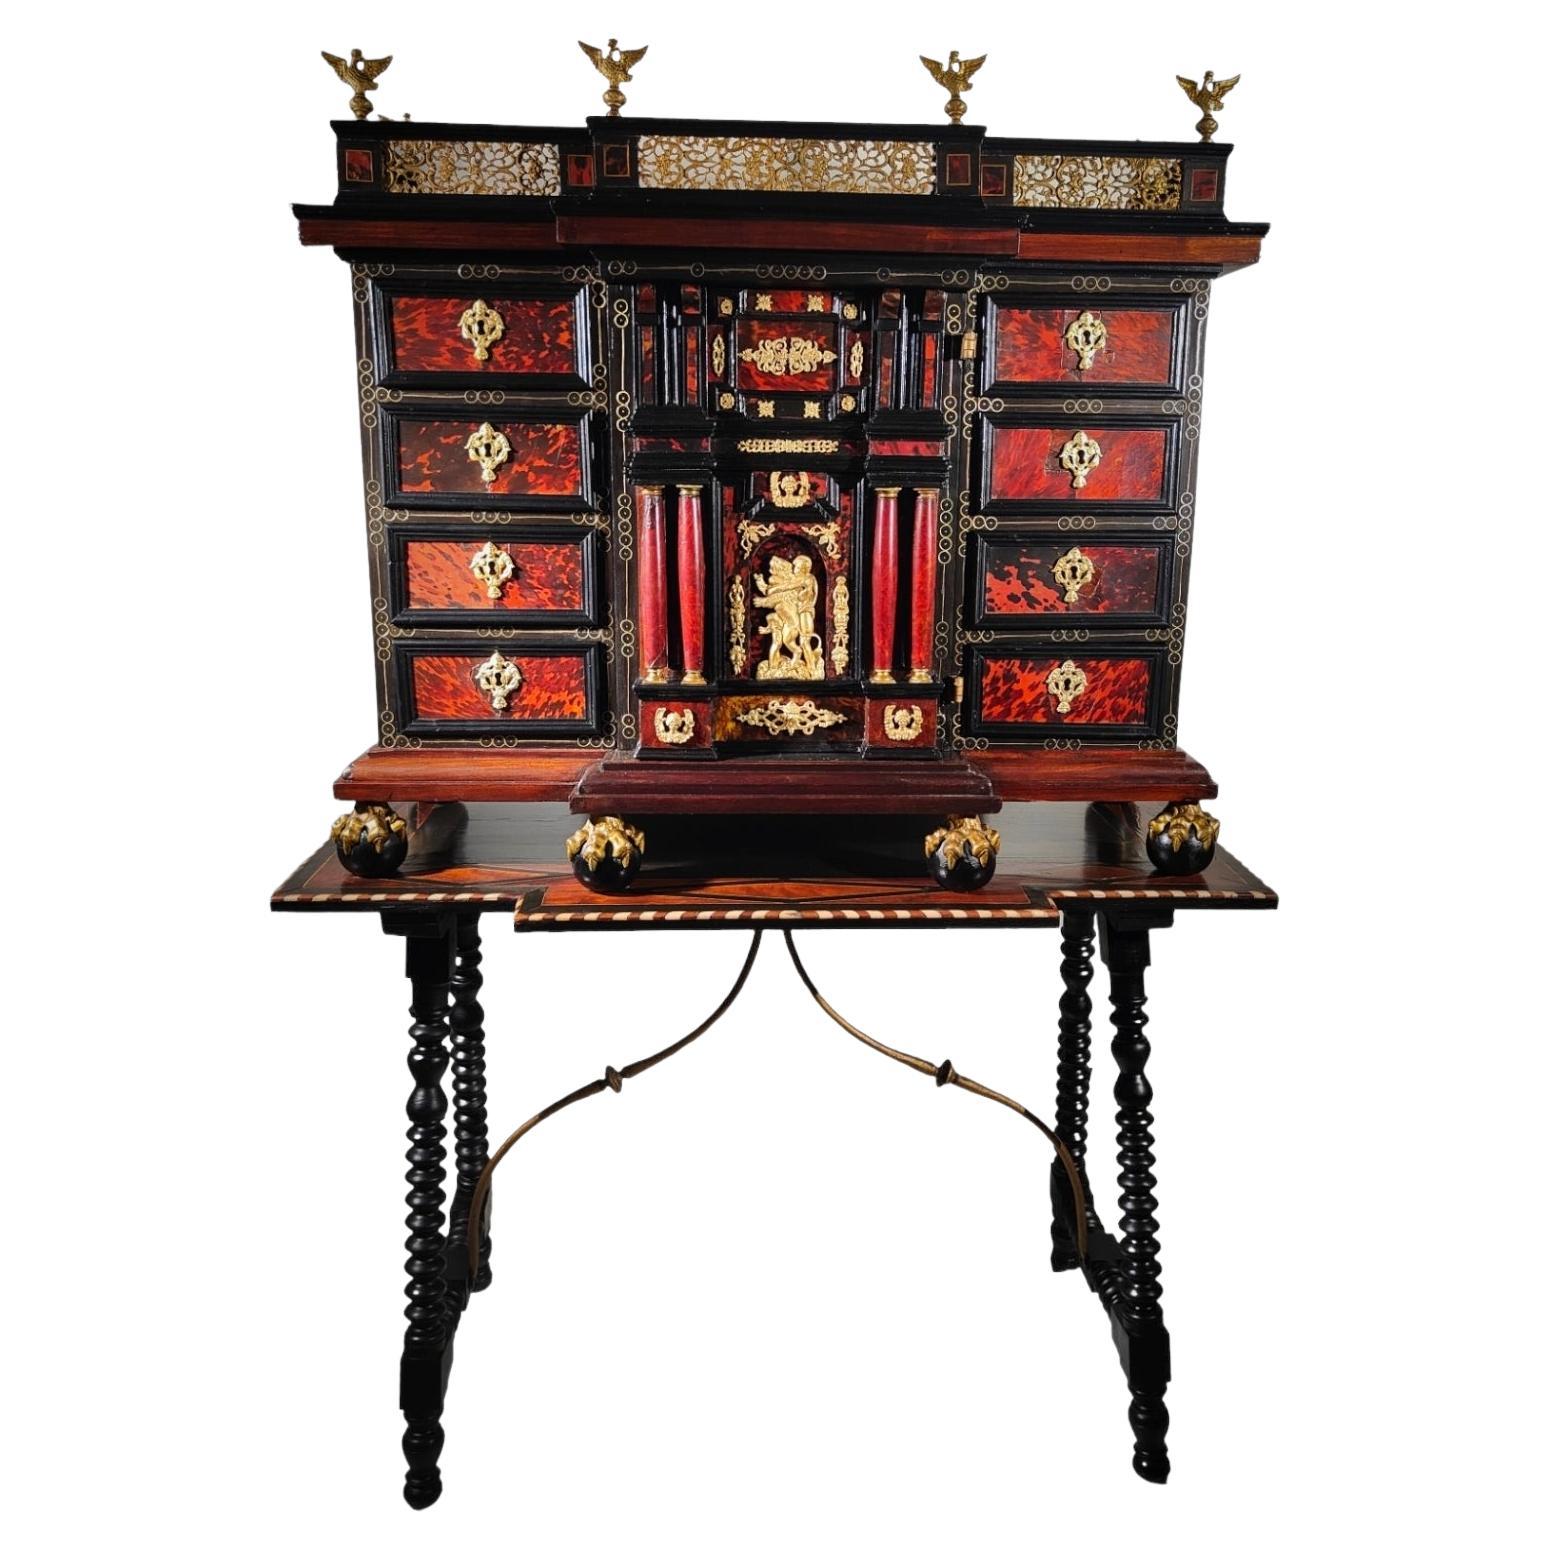 Italian Cabinet With Table, Late Seventeenth Century